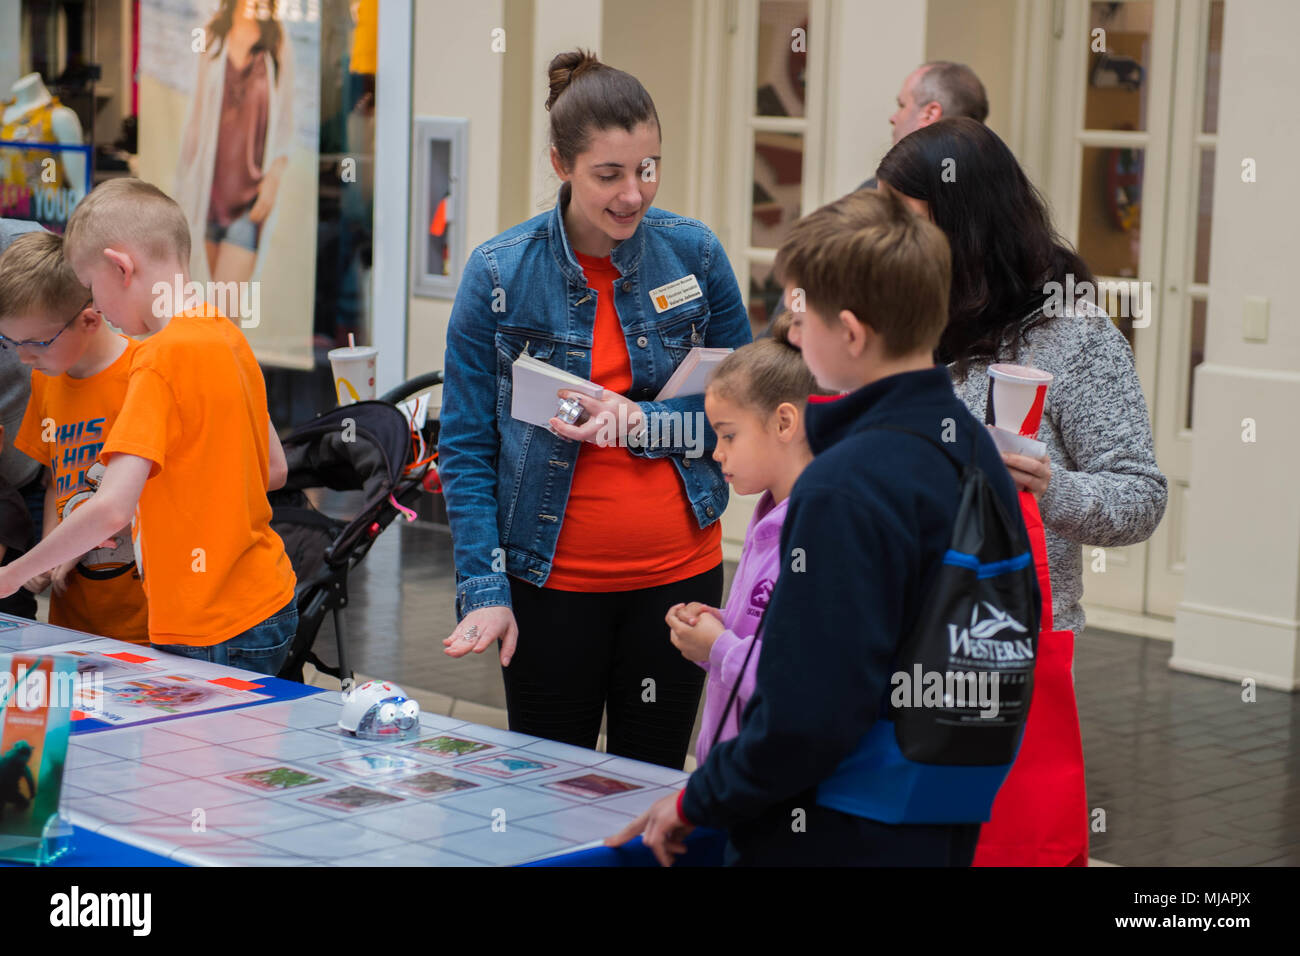 180428-N-SH284-0044 SILVERDALE, Wash., (April 28, 2018) Valerie Johnson, education specialist for the U.S. Naval Undersea Museum, engages with children during the 5th Annual West Sound STEM Showcase at the Kitsap Mall. The showcase presents science, technology, engineering and math principles at a fun, interactive event hosted by dozens of area organizations showcasing hands-on activities to engage youth of all ages. Hits have included a catapult challenge, underwater vehicle exploration, robotics, rocket launches, bridge building, field medicine, egg drops, animals, circuitry, X-ray technolog Stock Photo